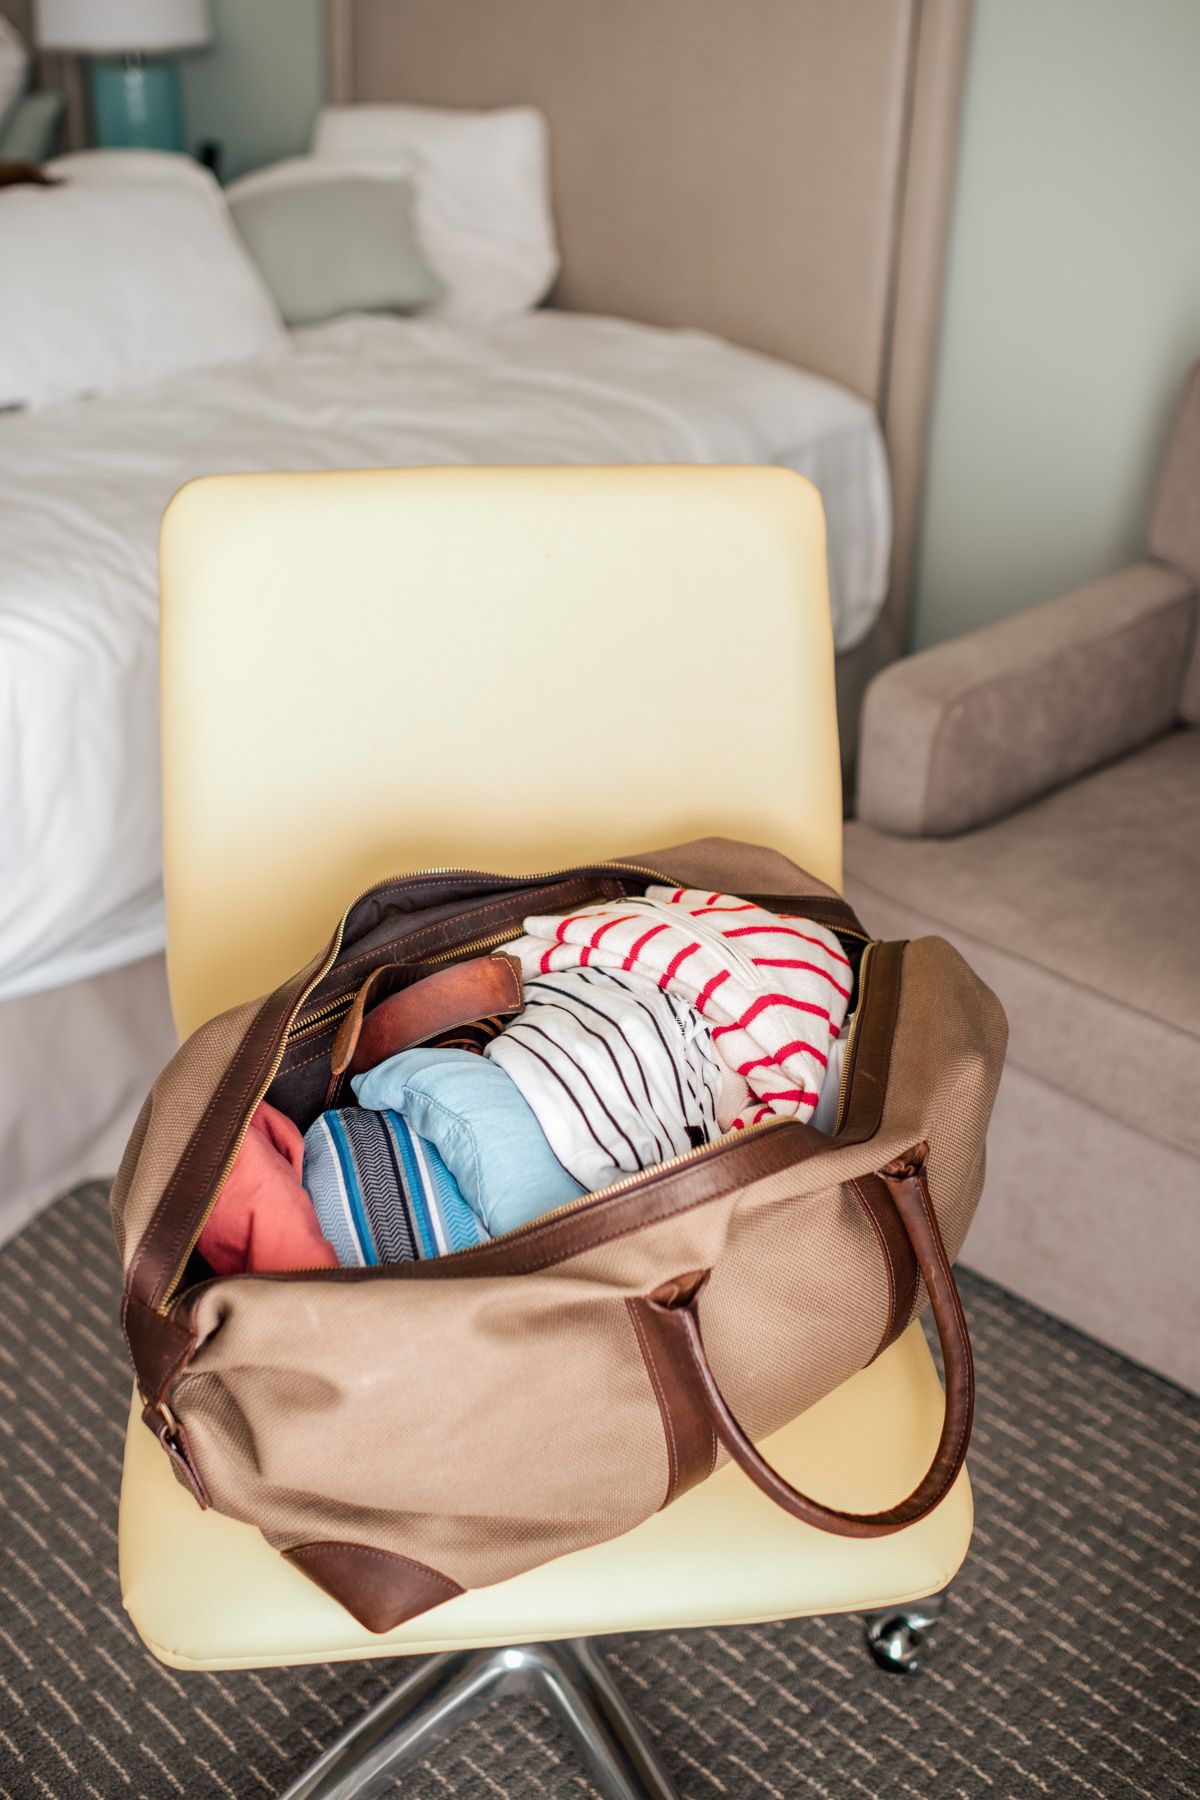 A brown duffel bag, open and filled with folded clothes, sits on a cream-colored chair in a bedroom suggesting packing for a trip.